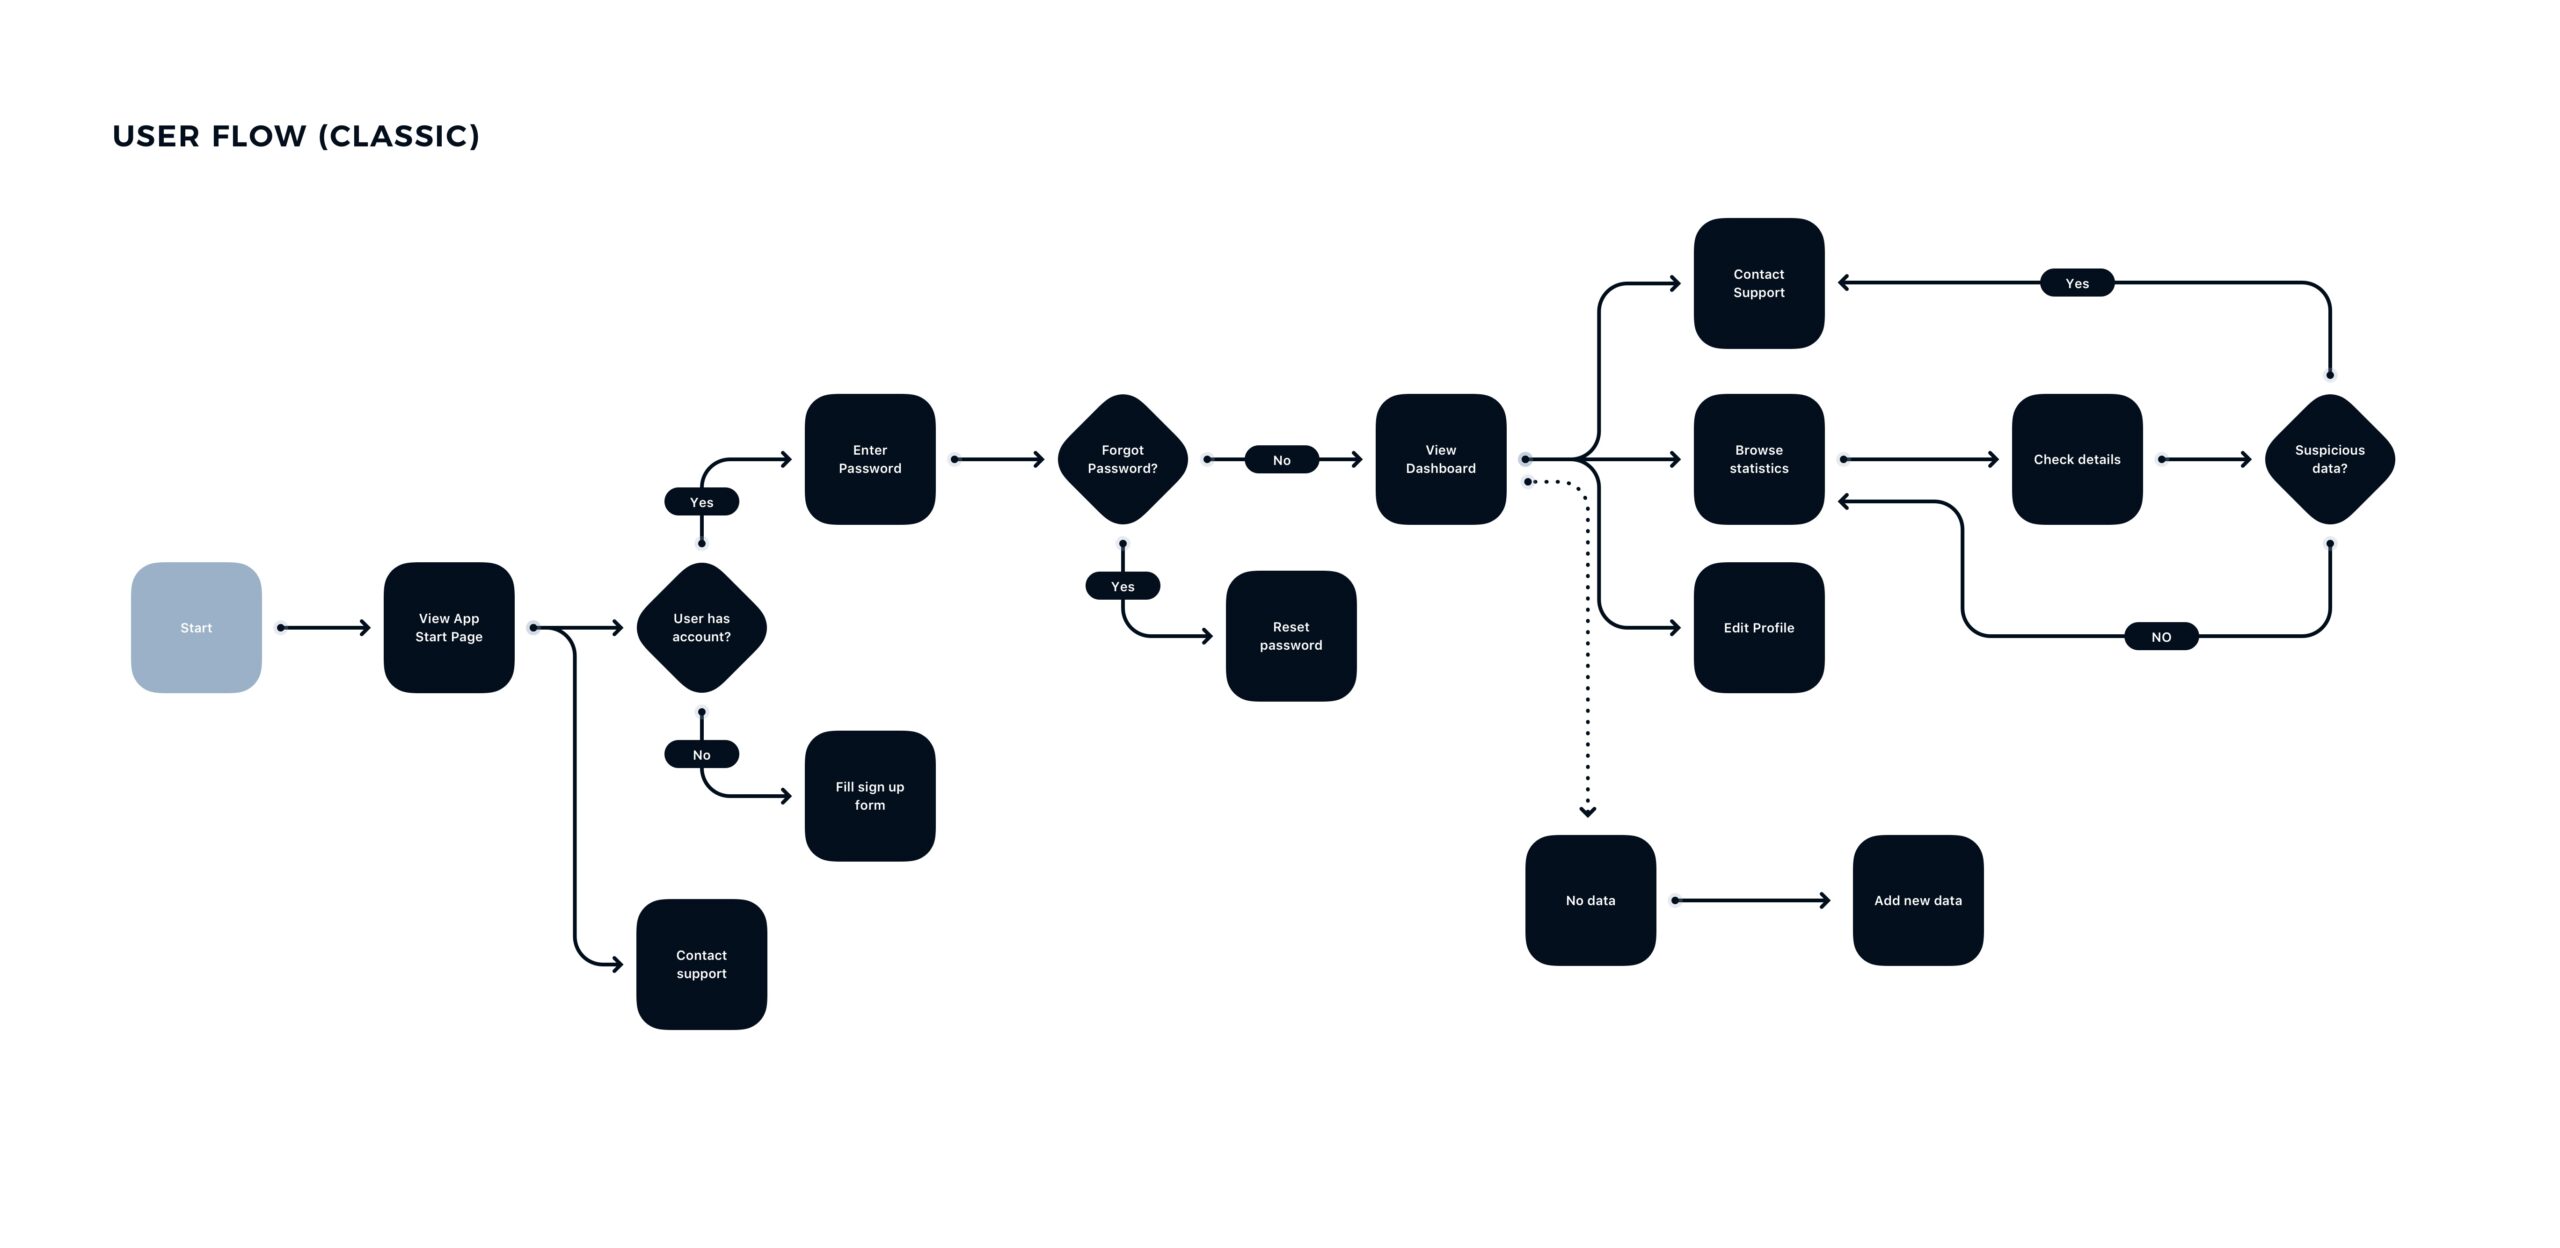 How to Design and Document User Flows | AltexSoft